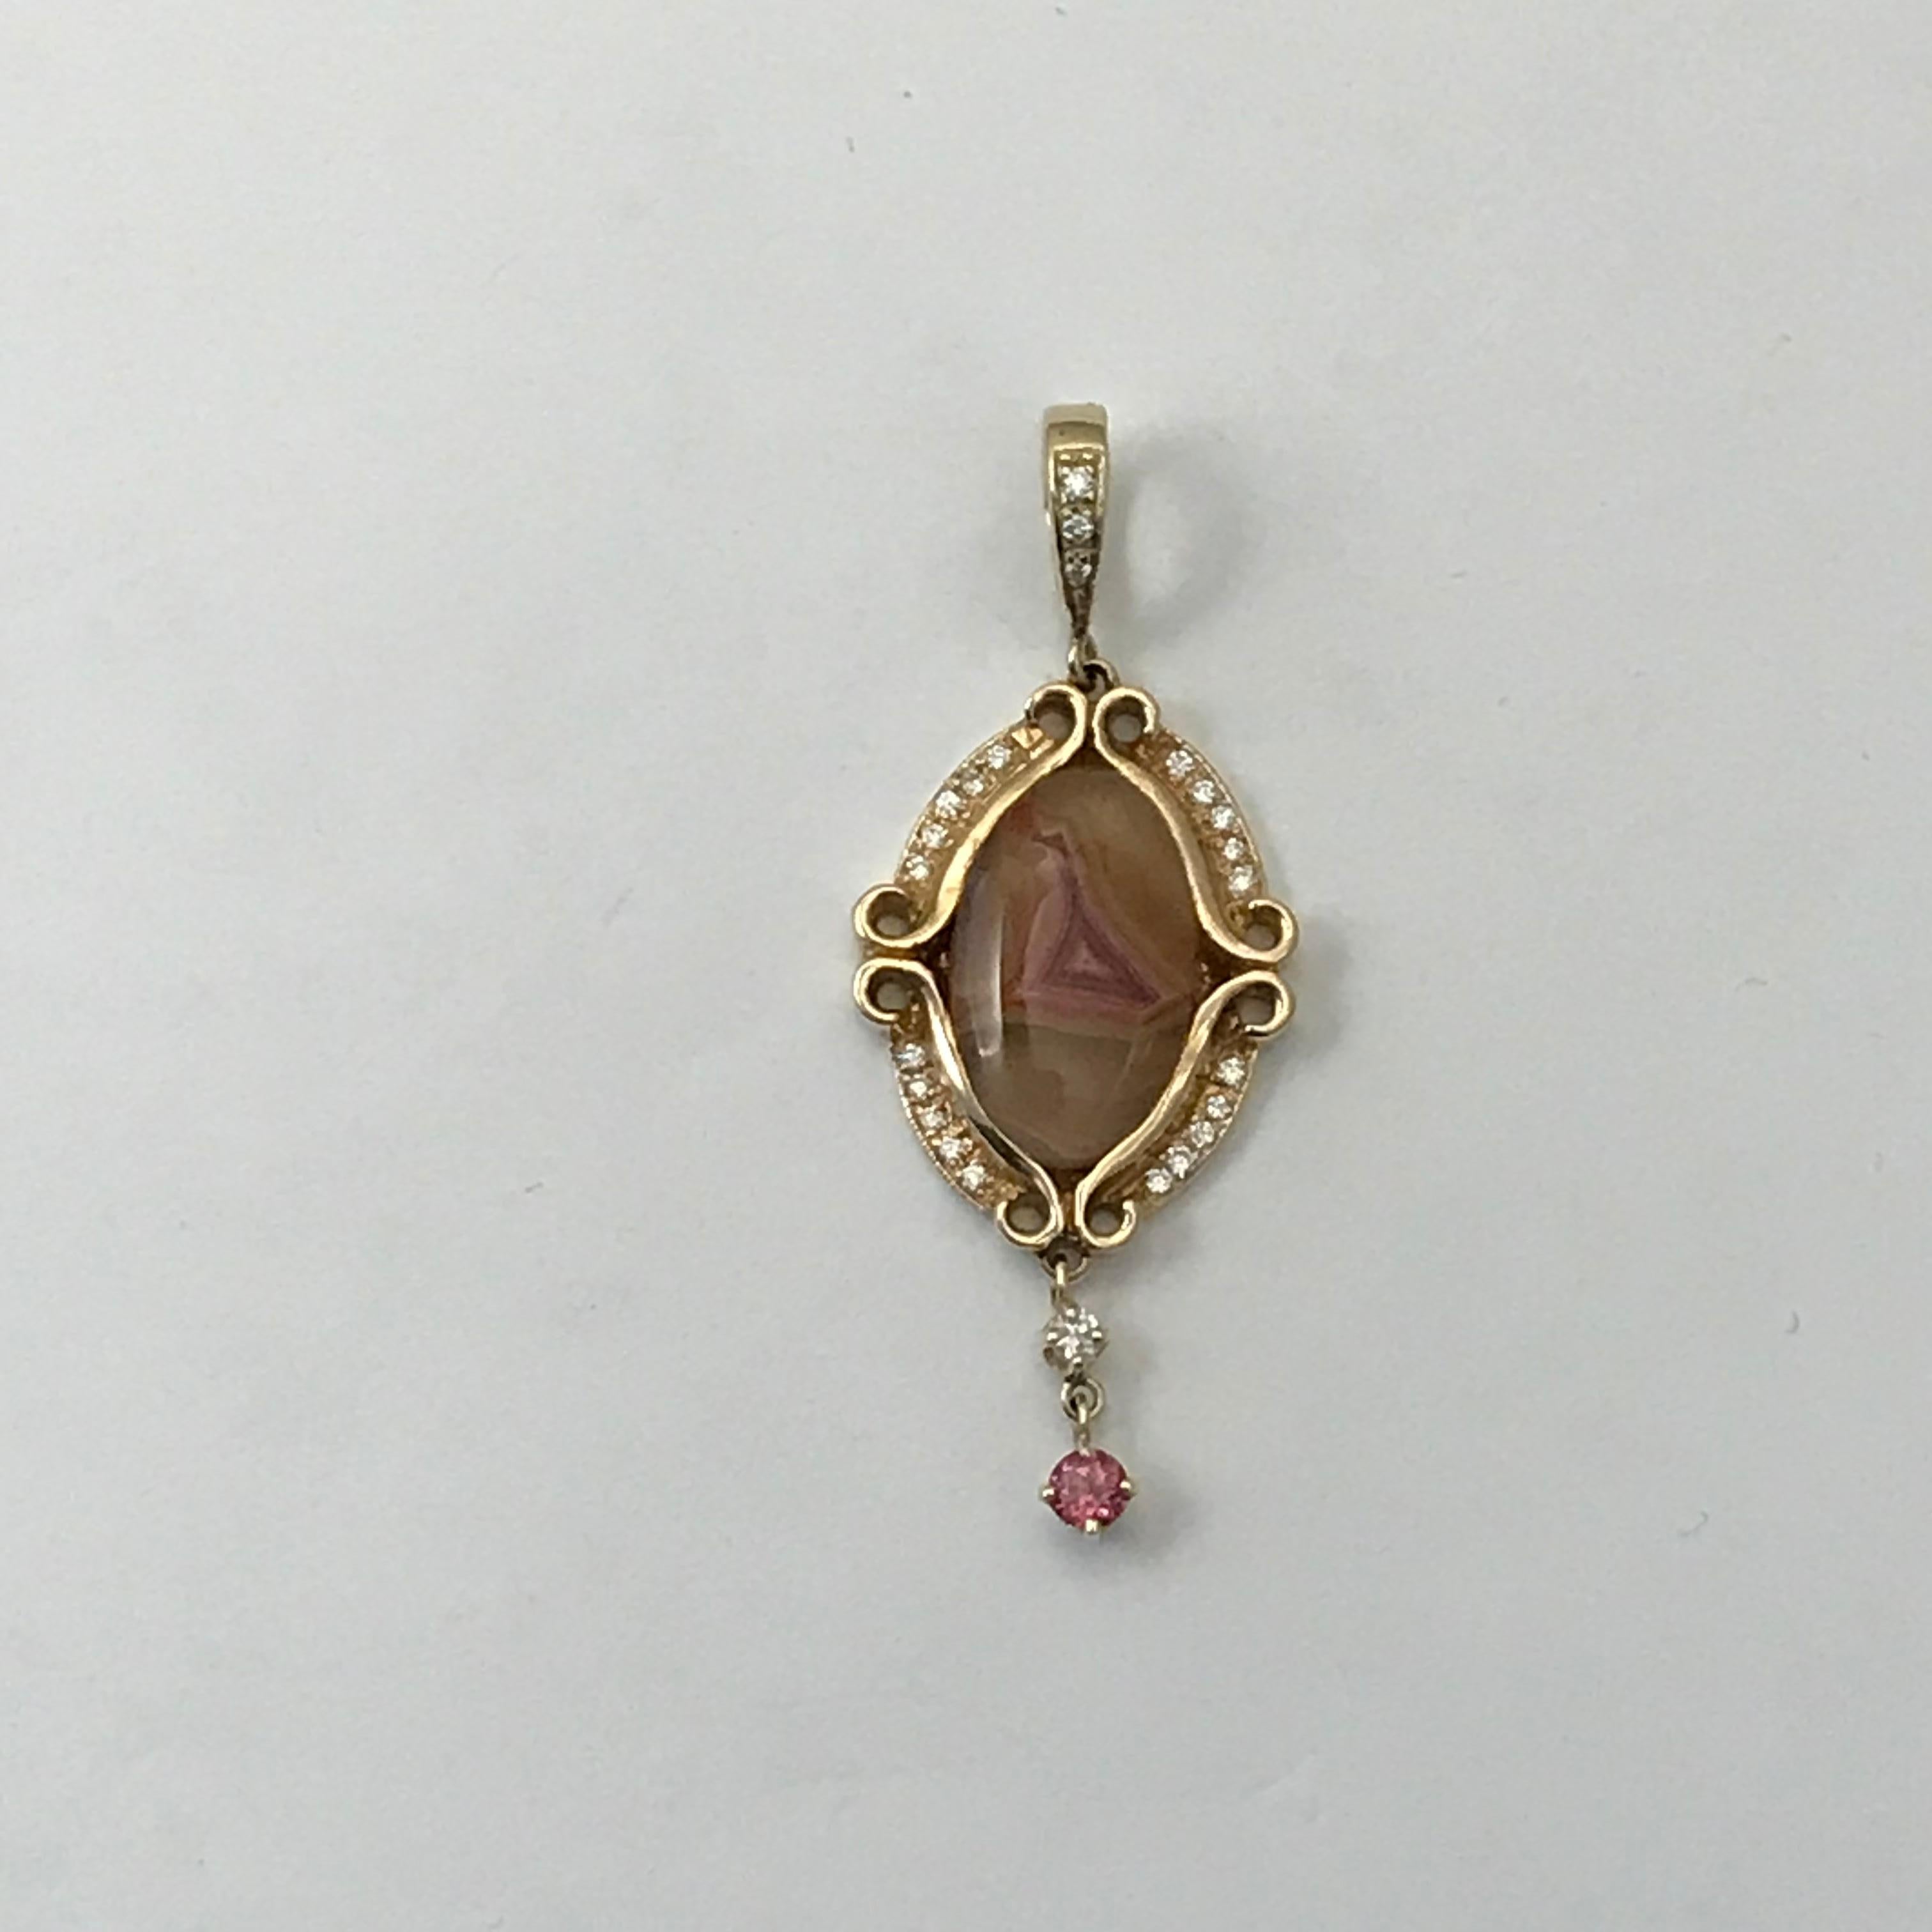 Agate Laguna Pendant in 14 K Yellow Gold With Diamonds

agate laguna pendant set in 14k yellow gold accented with .36 cts of diamonds and a rhodolite garnet dangle. 